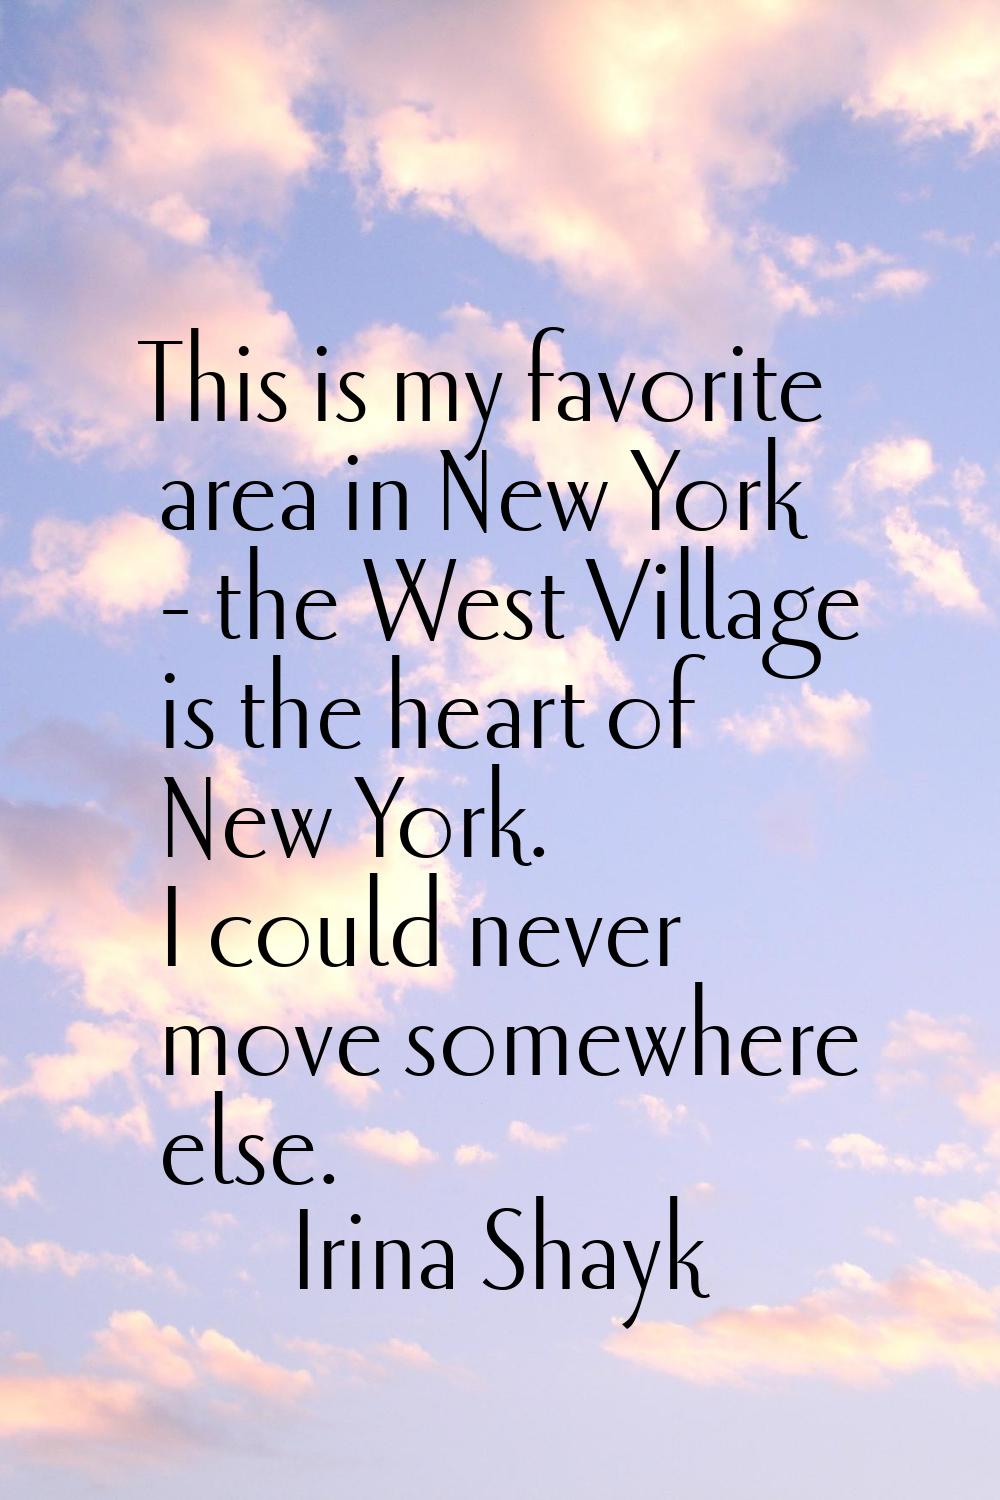 This is my favorite area in New York - the West Village is the heart of New York. I could never mov